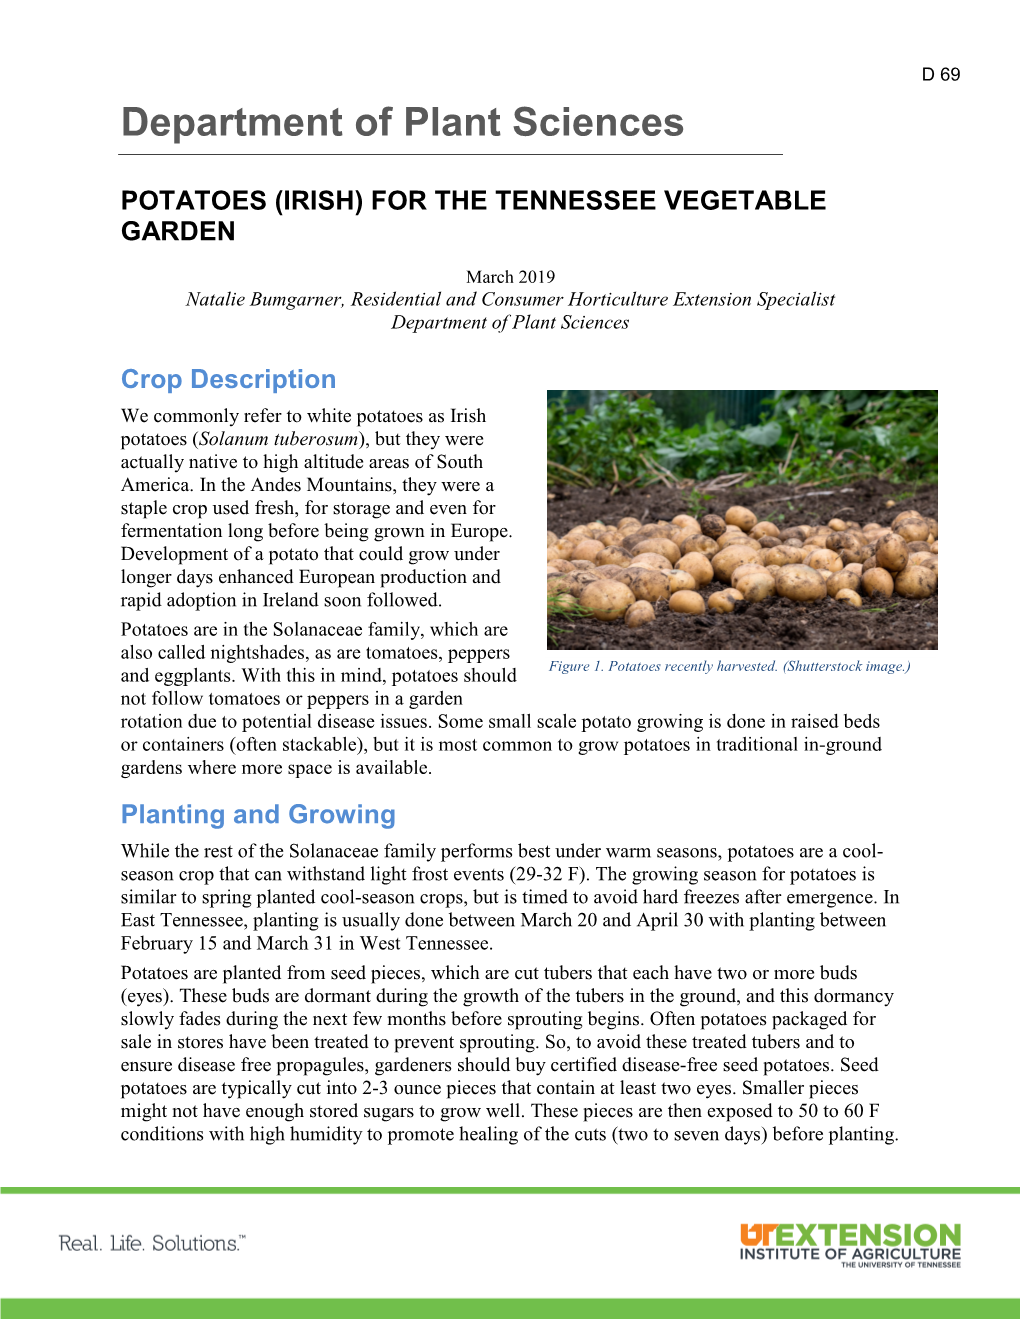 Potatoes (Irish) for the Tennessee Vegetable Garden D 69